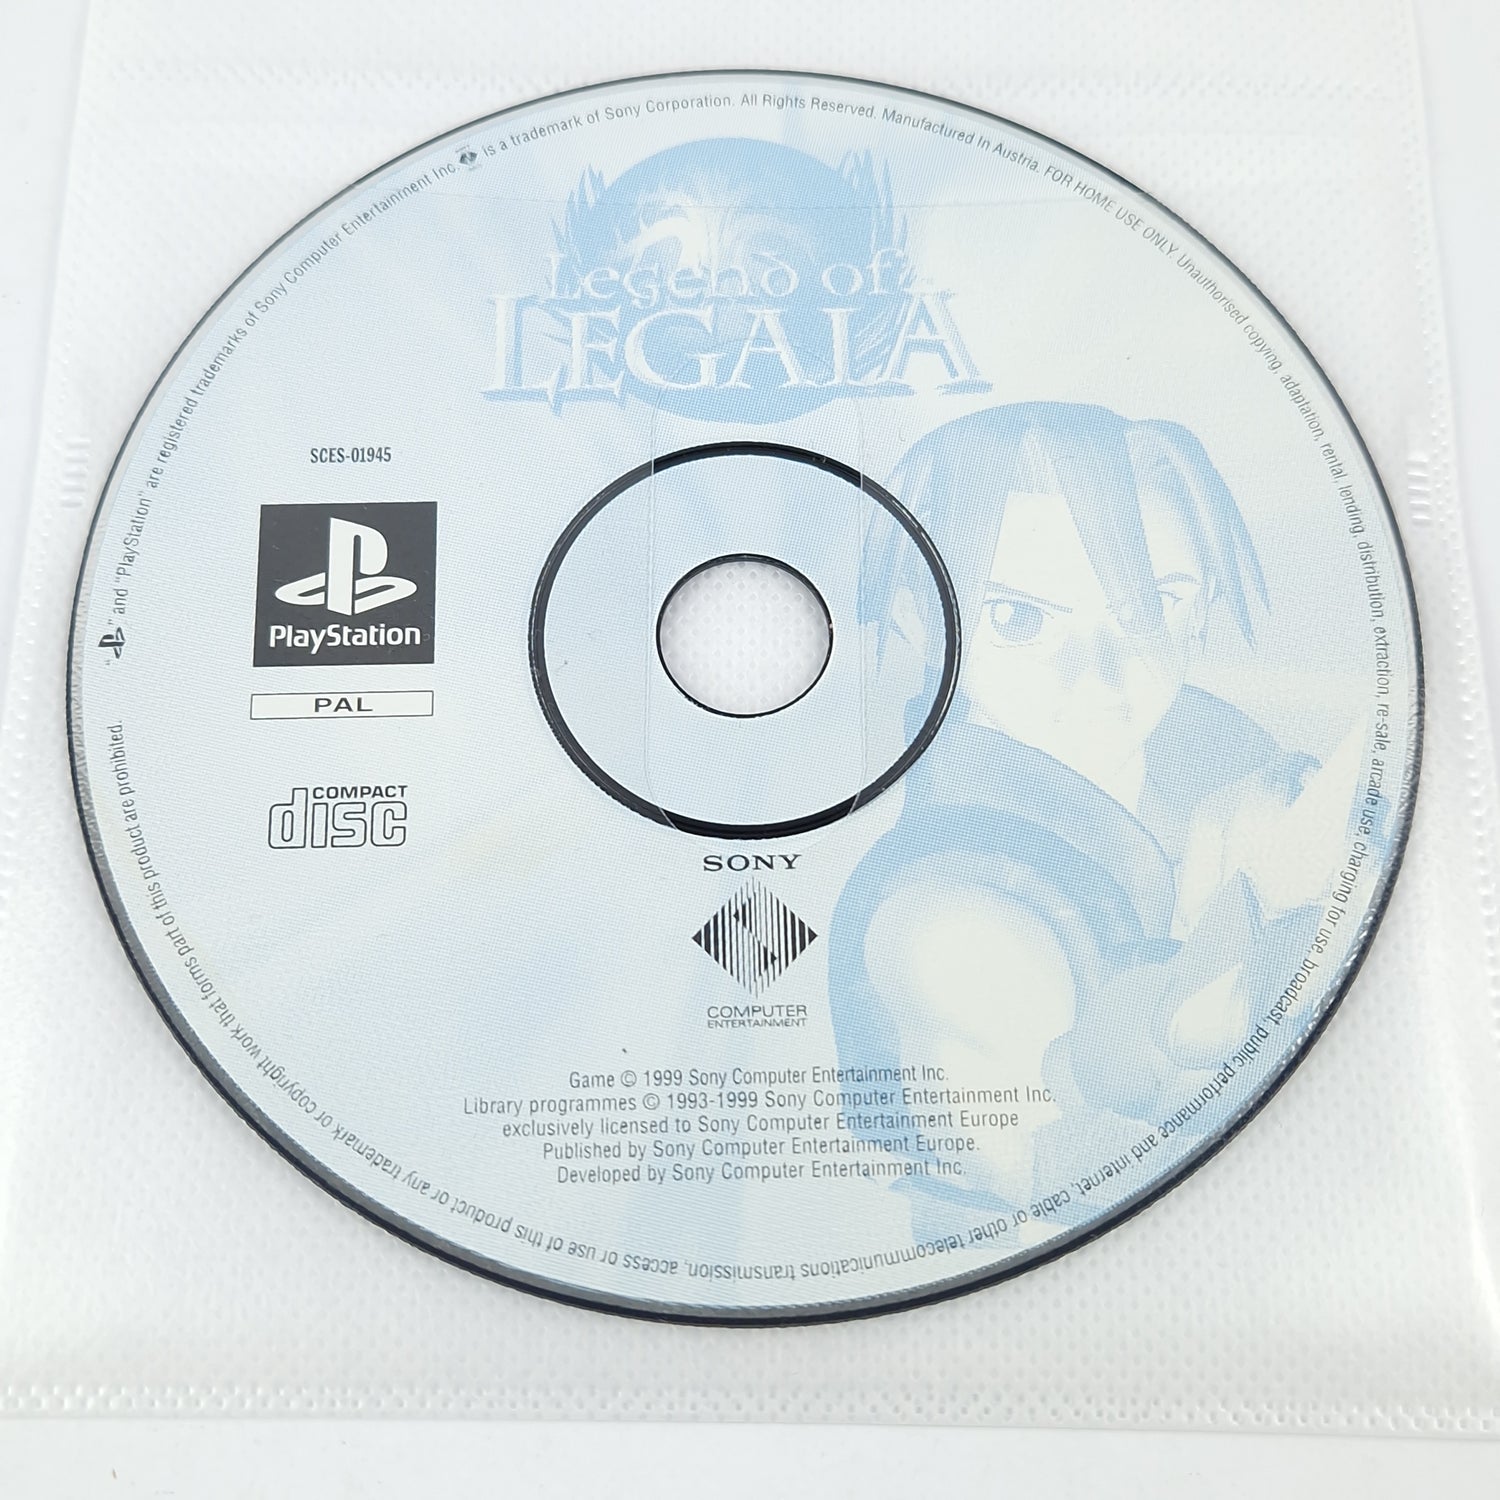 Playstation 1 game: Legend of Legaia - CD with instructions without original packaging / PS1 PAL